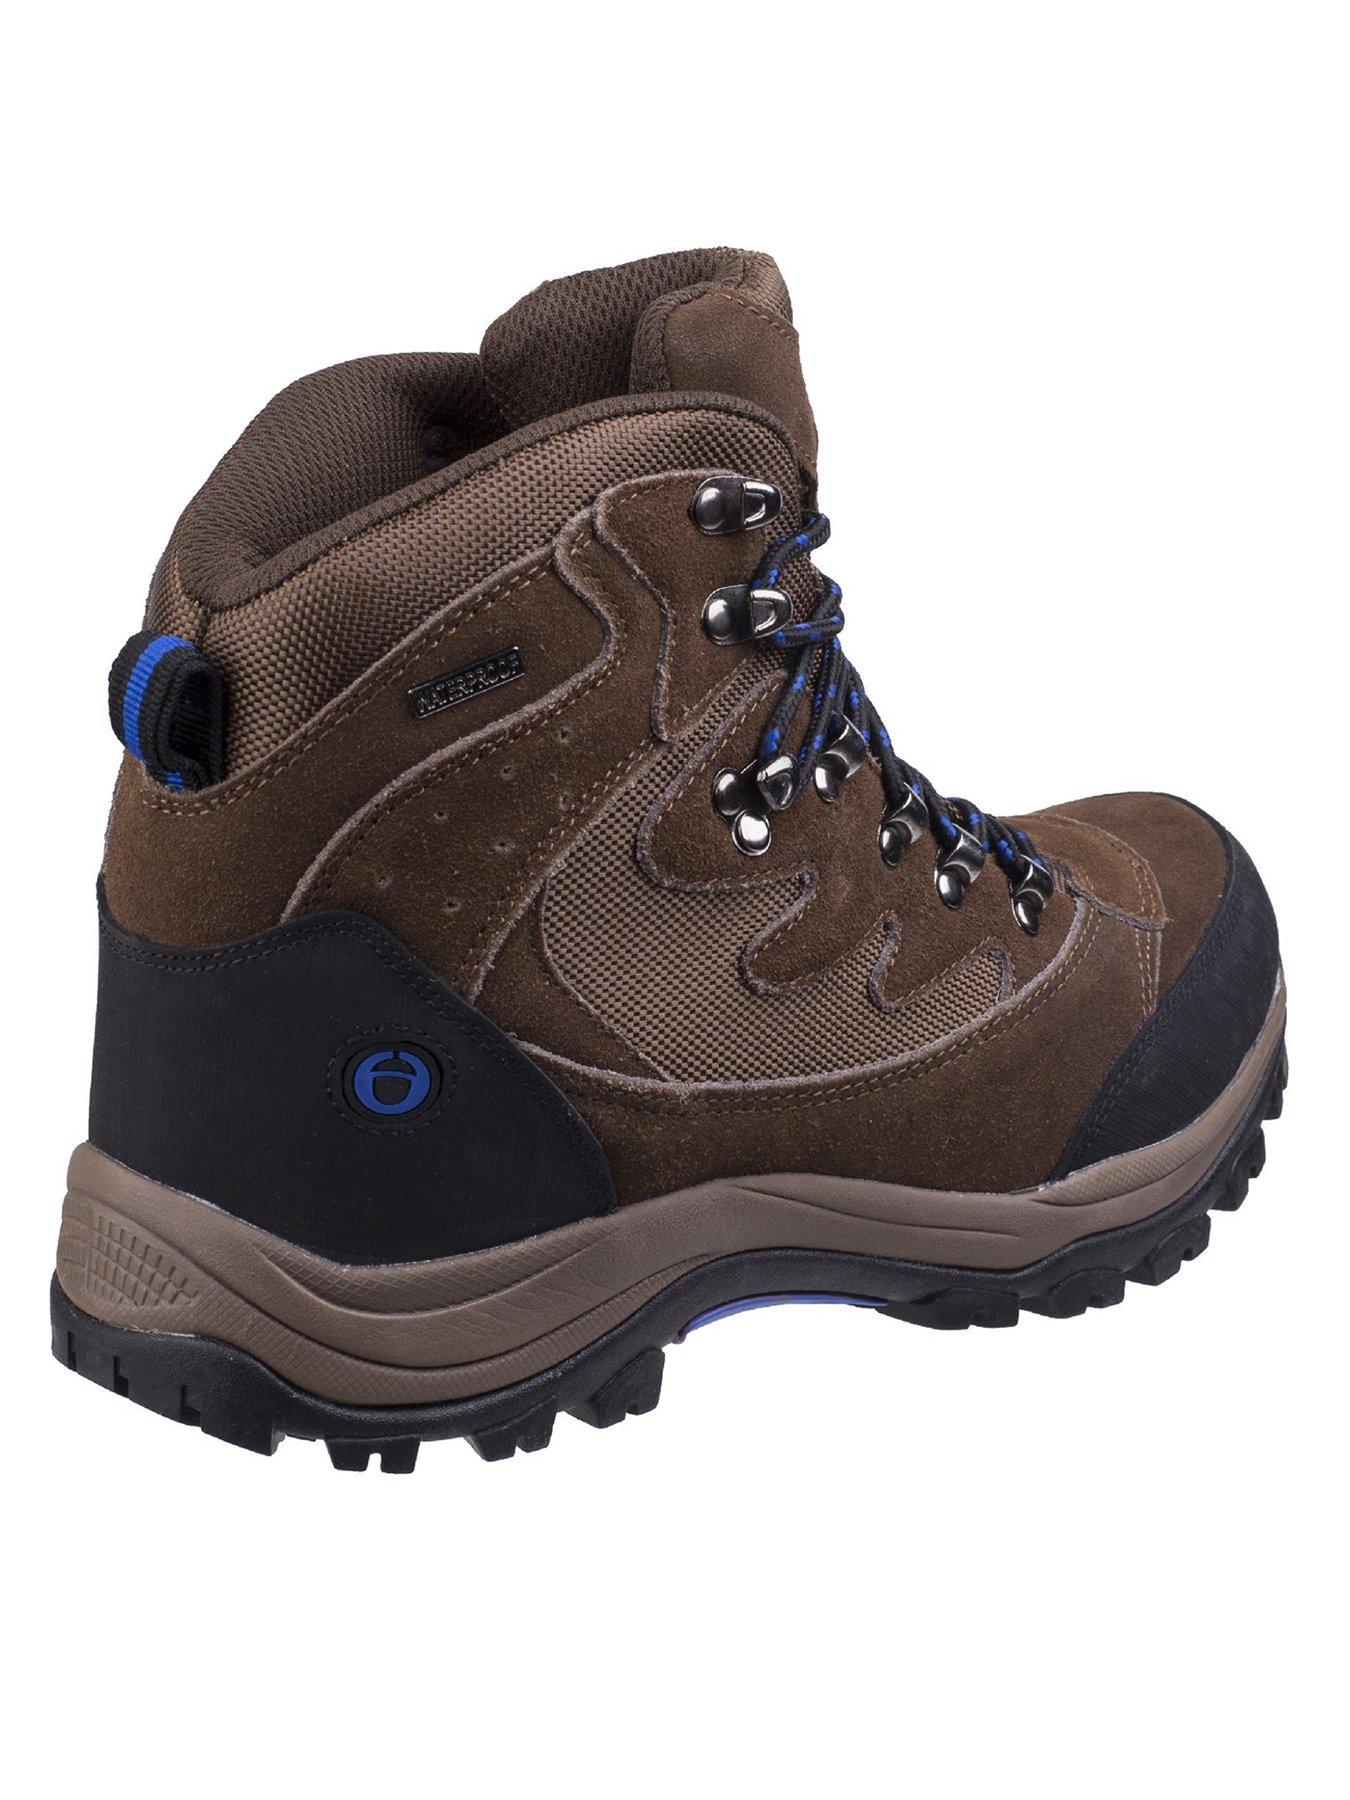  Oxerton Mid Walking Boots - Brown